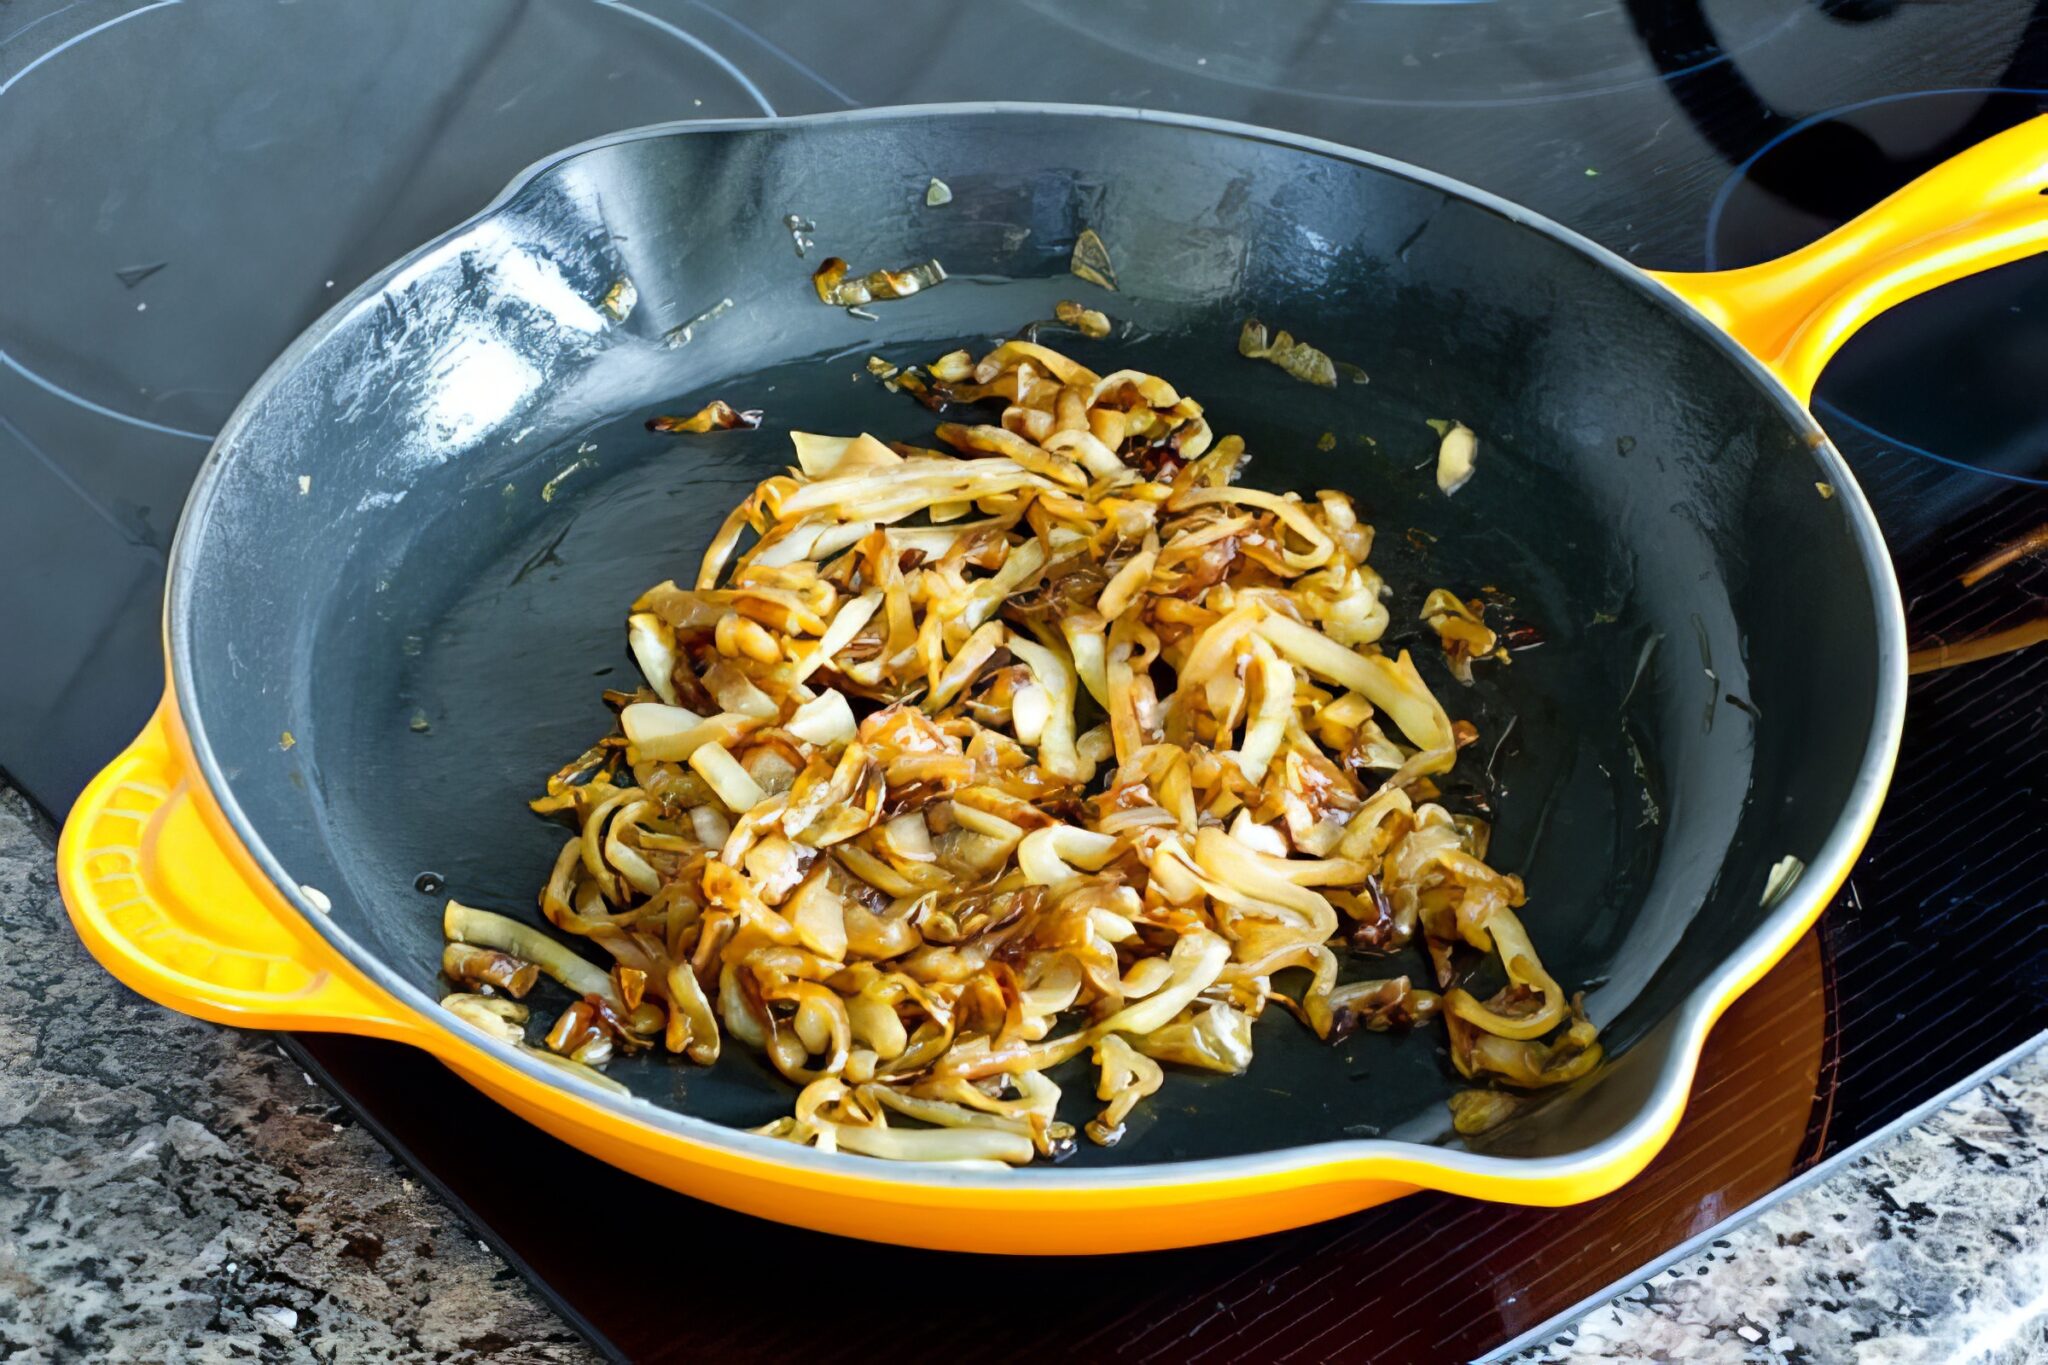 caramelized onions in a pan on the stovetop